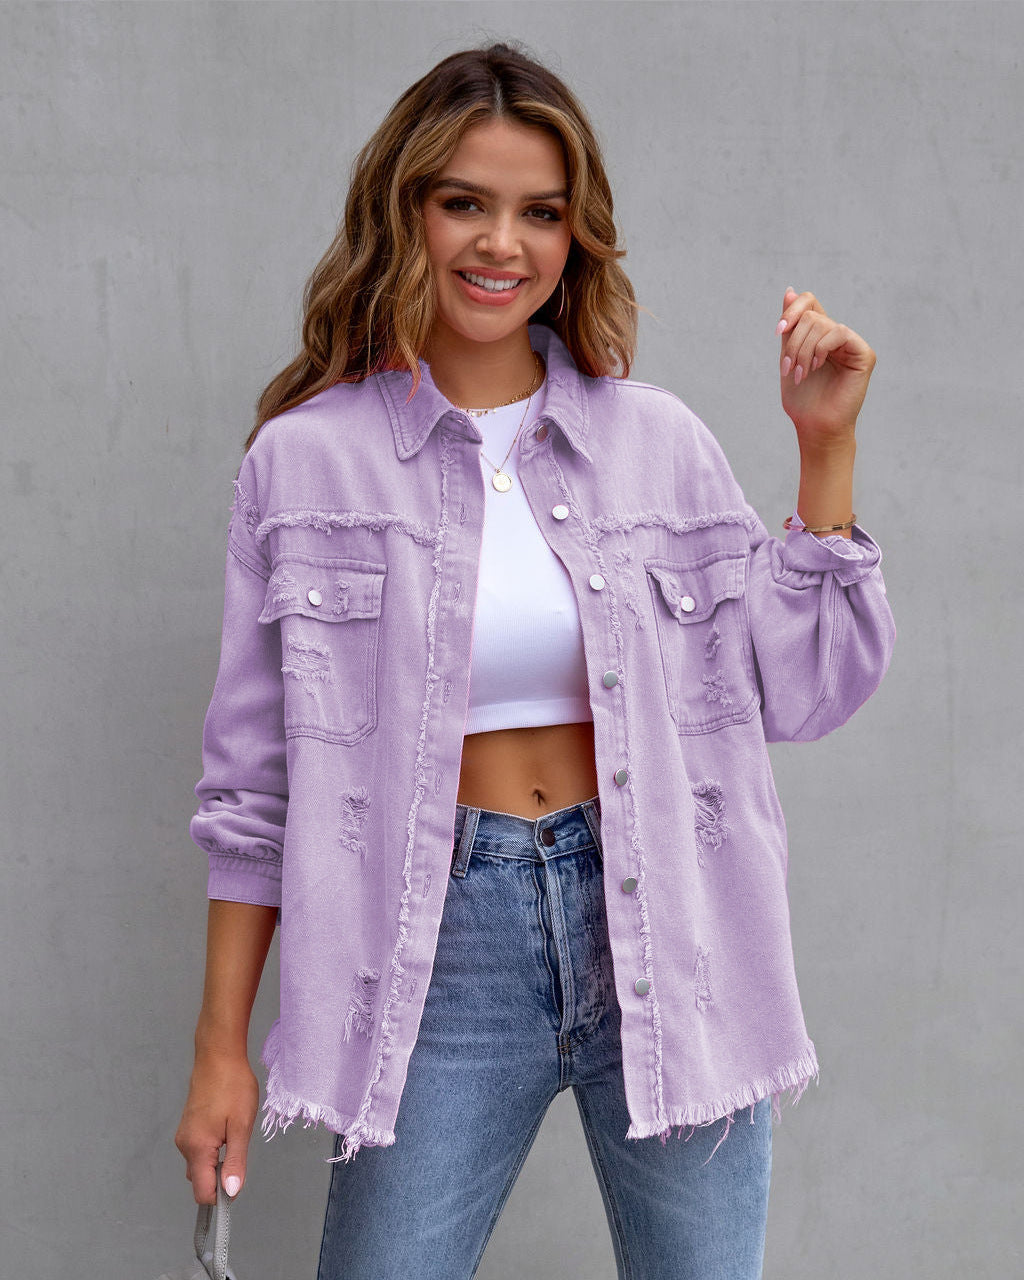 Fashion Ripped Shirt Jacket Female Autumn And Spring Casual Tops